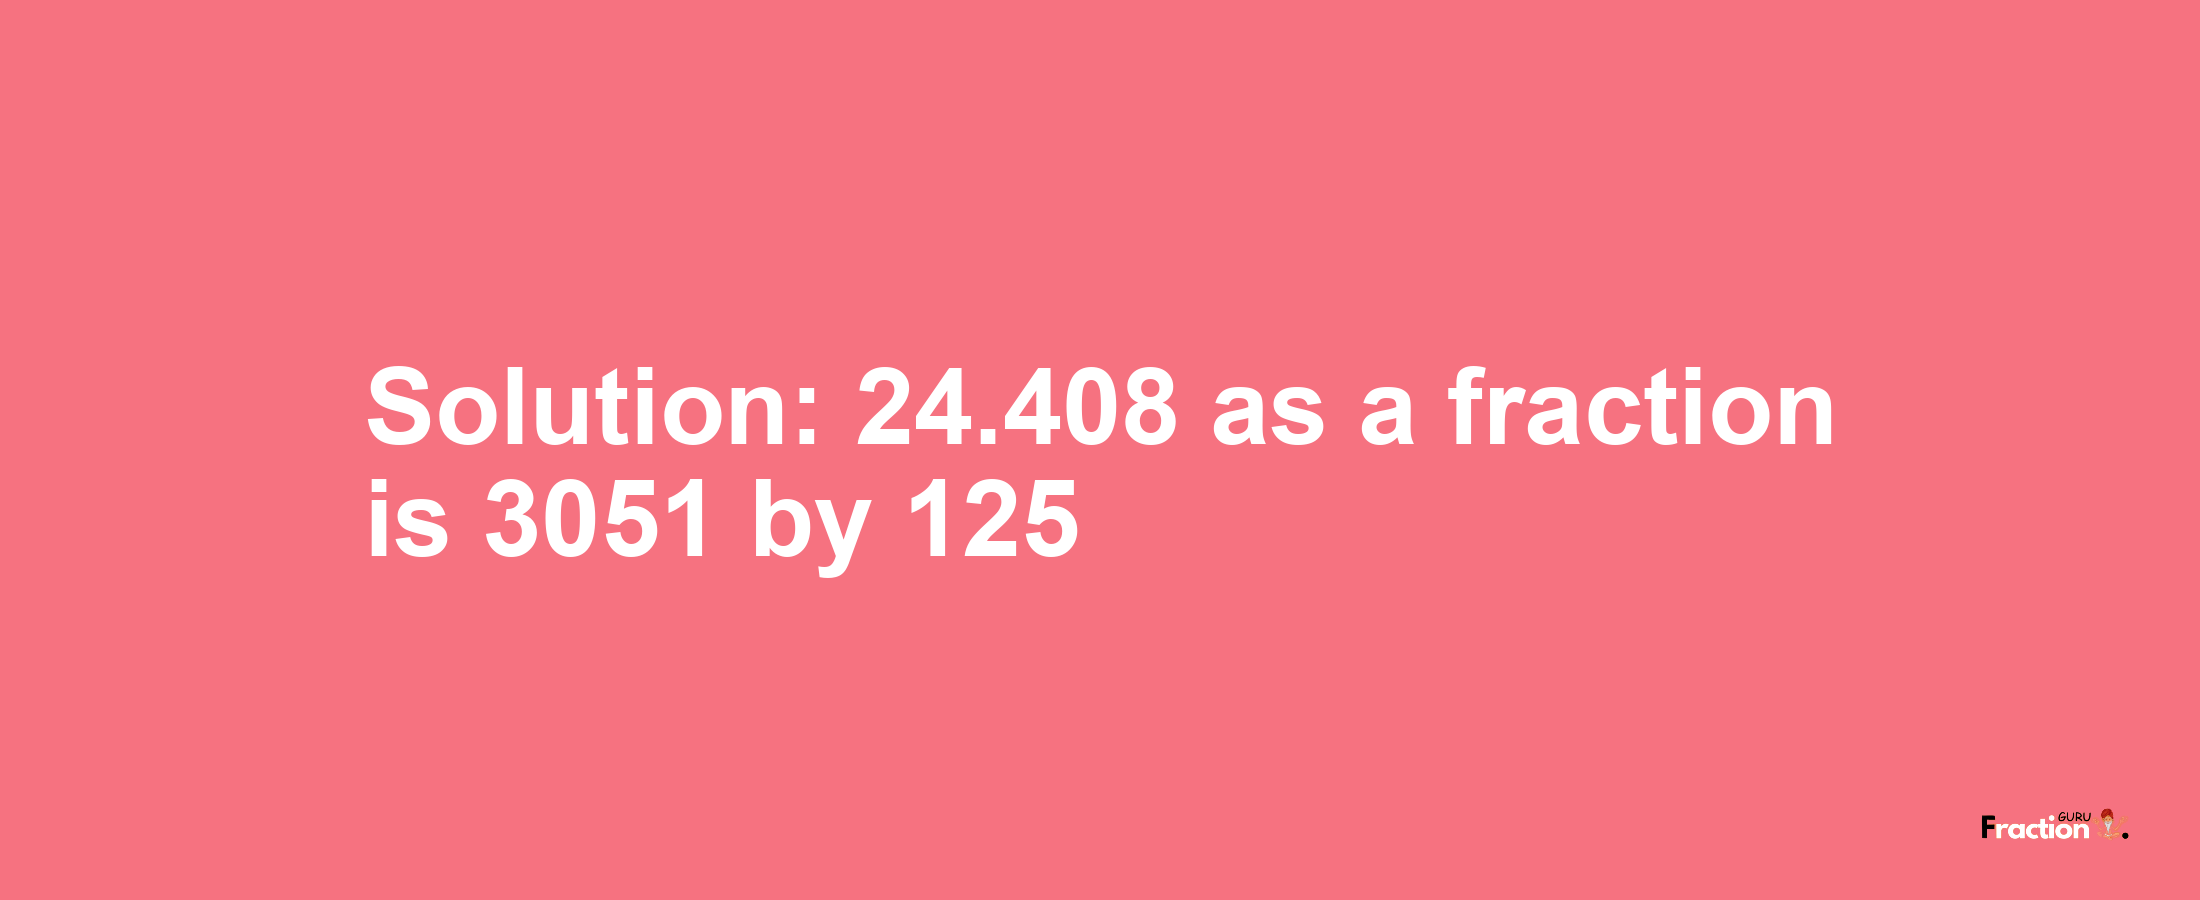 Solution:24.408 as a fraction is 3051/125